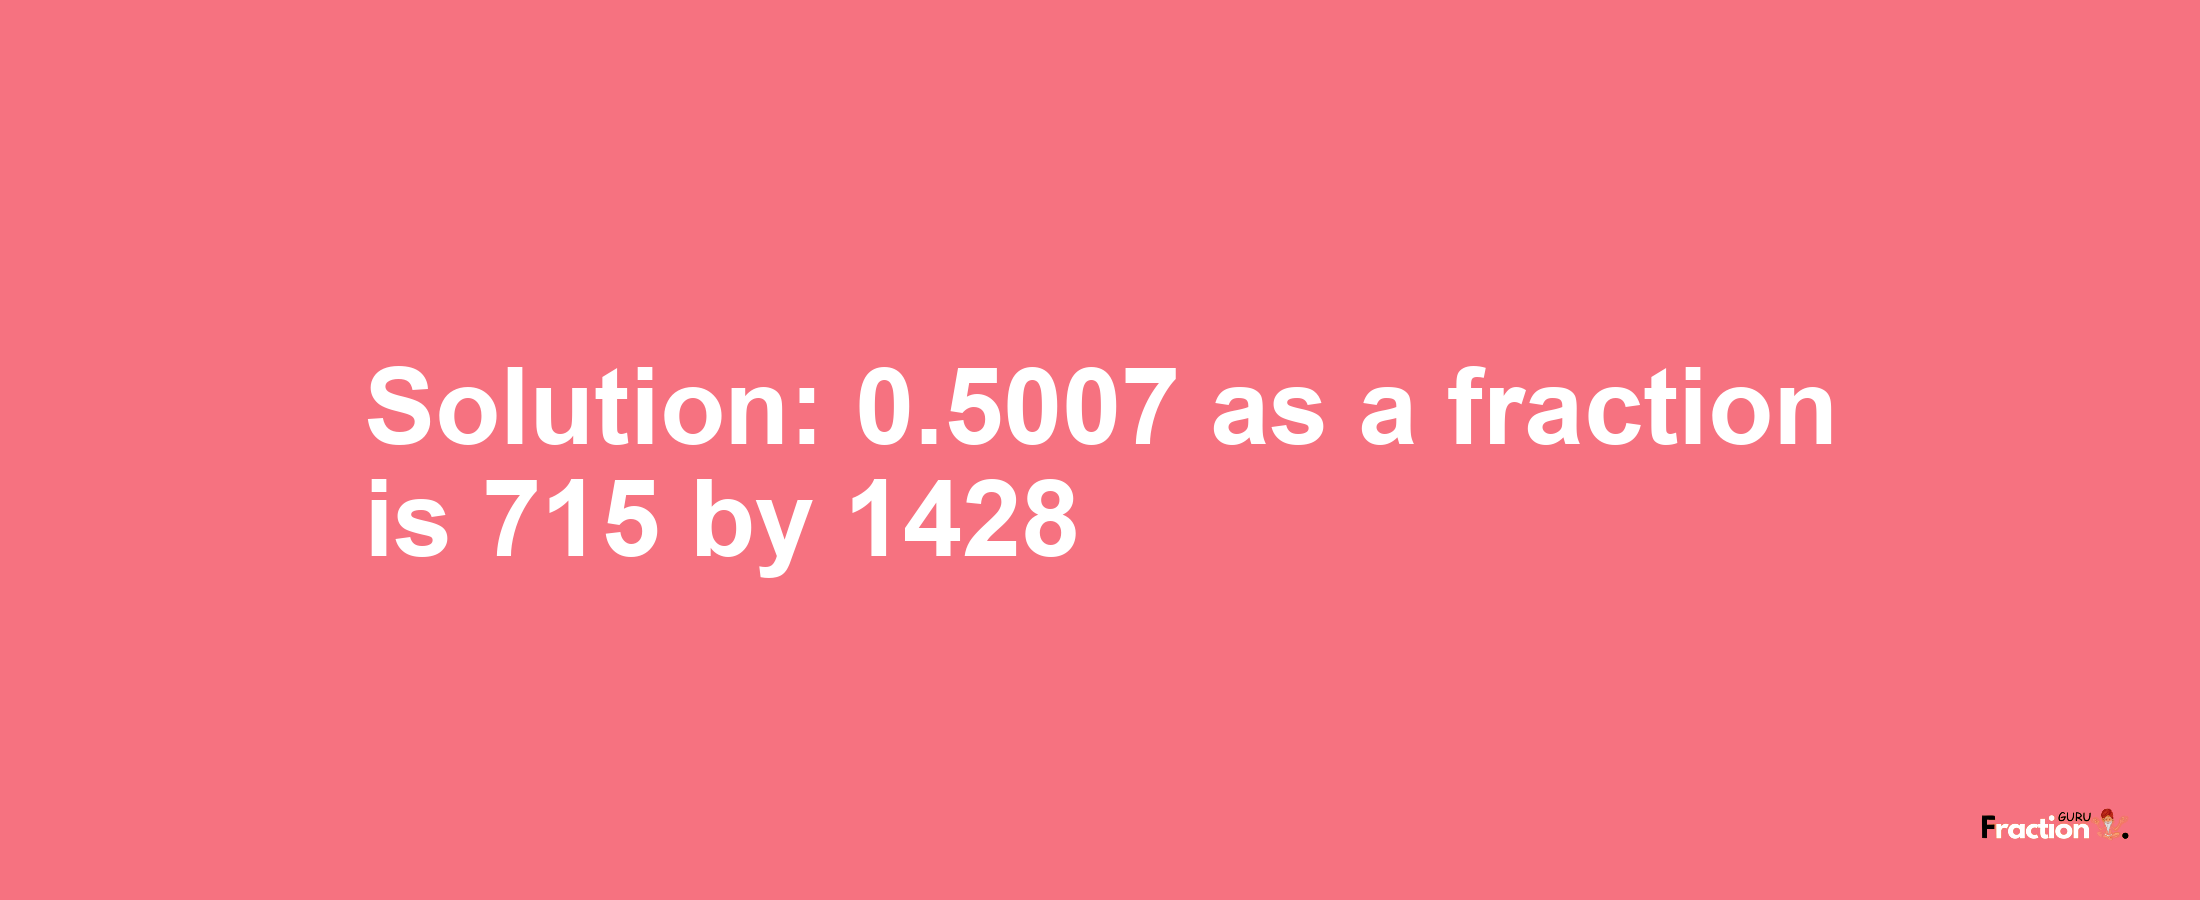 Solution:0.5007 as a fraction is 715/1428